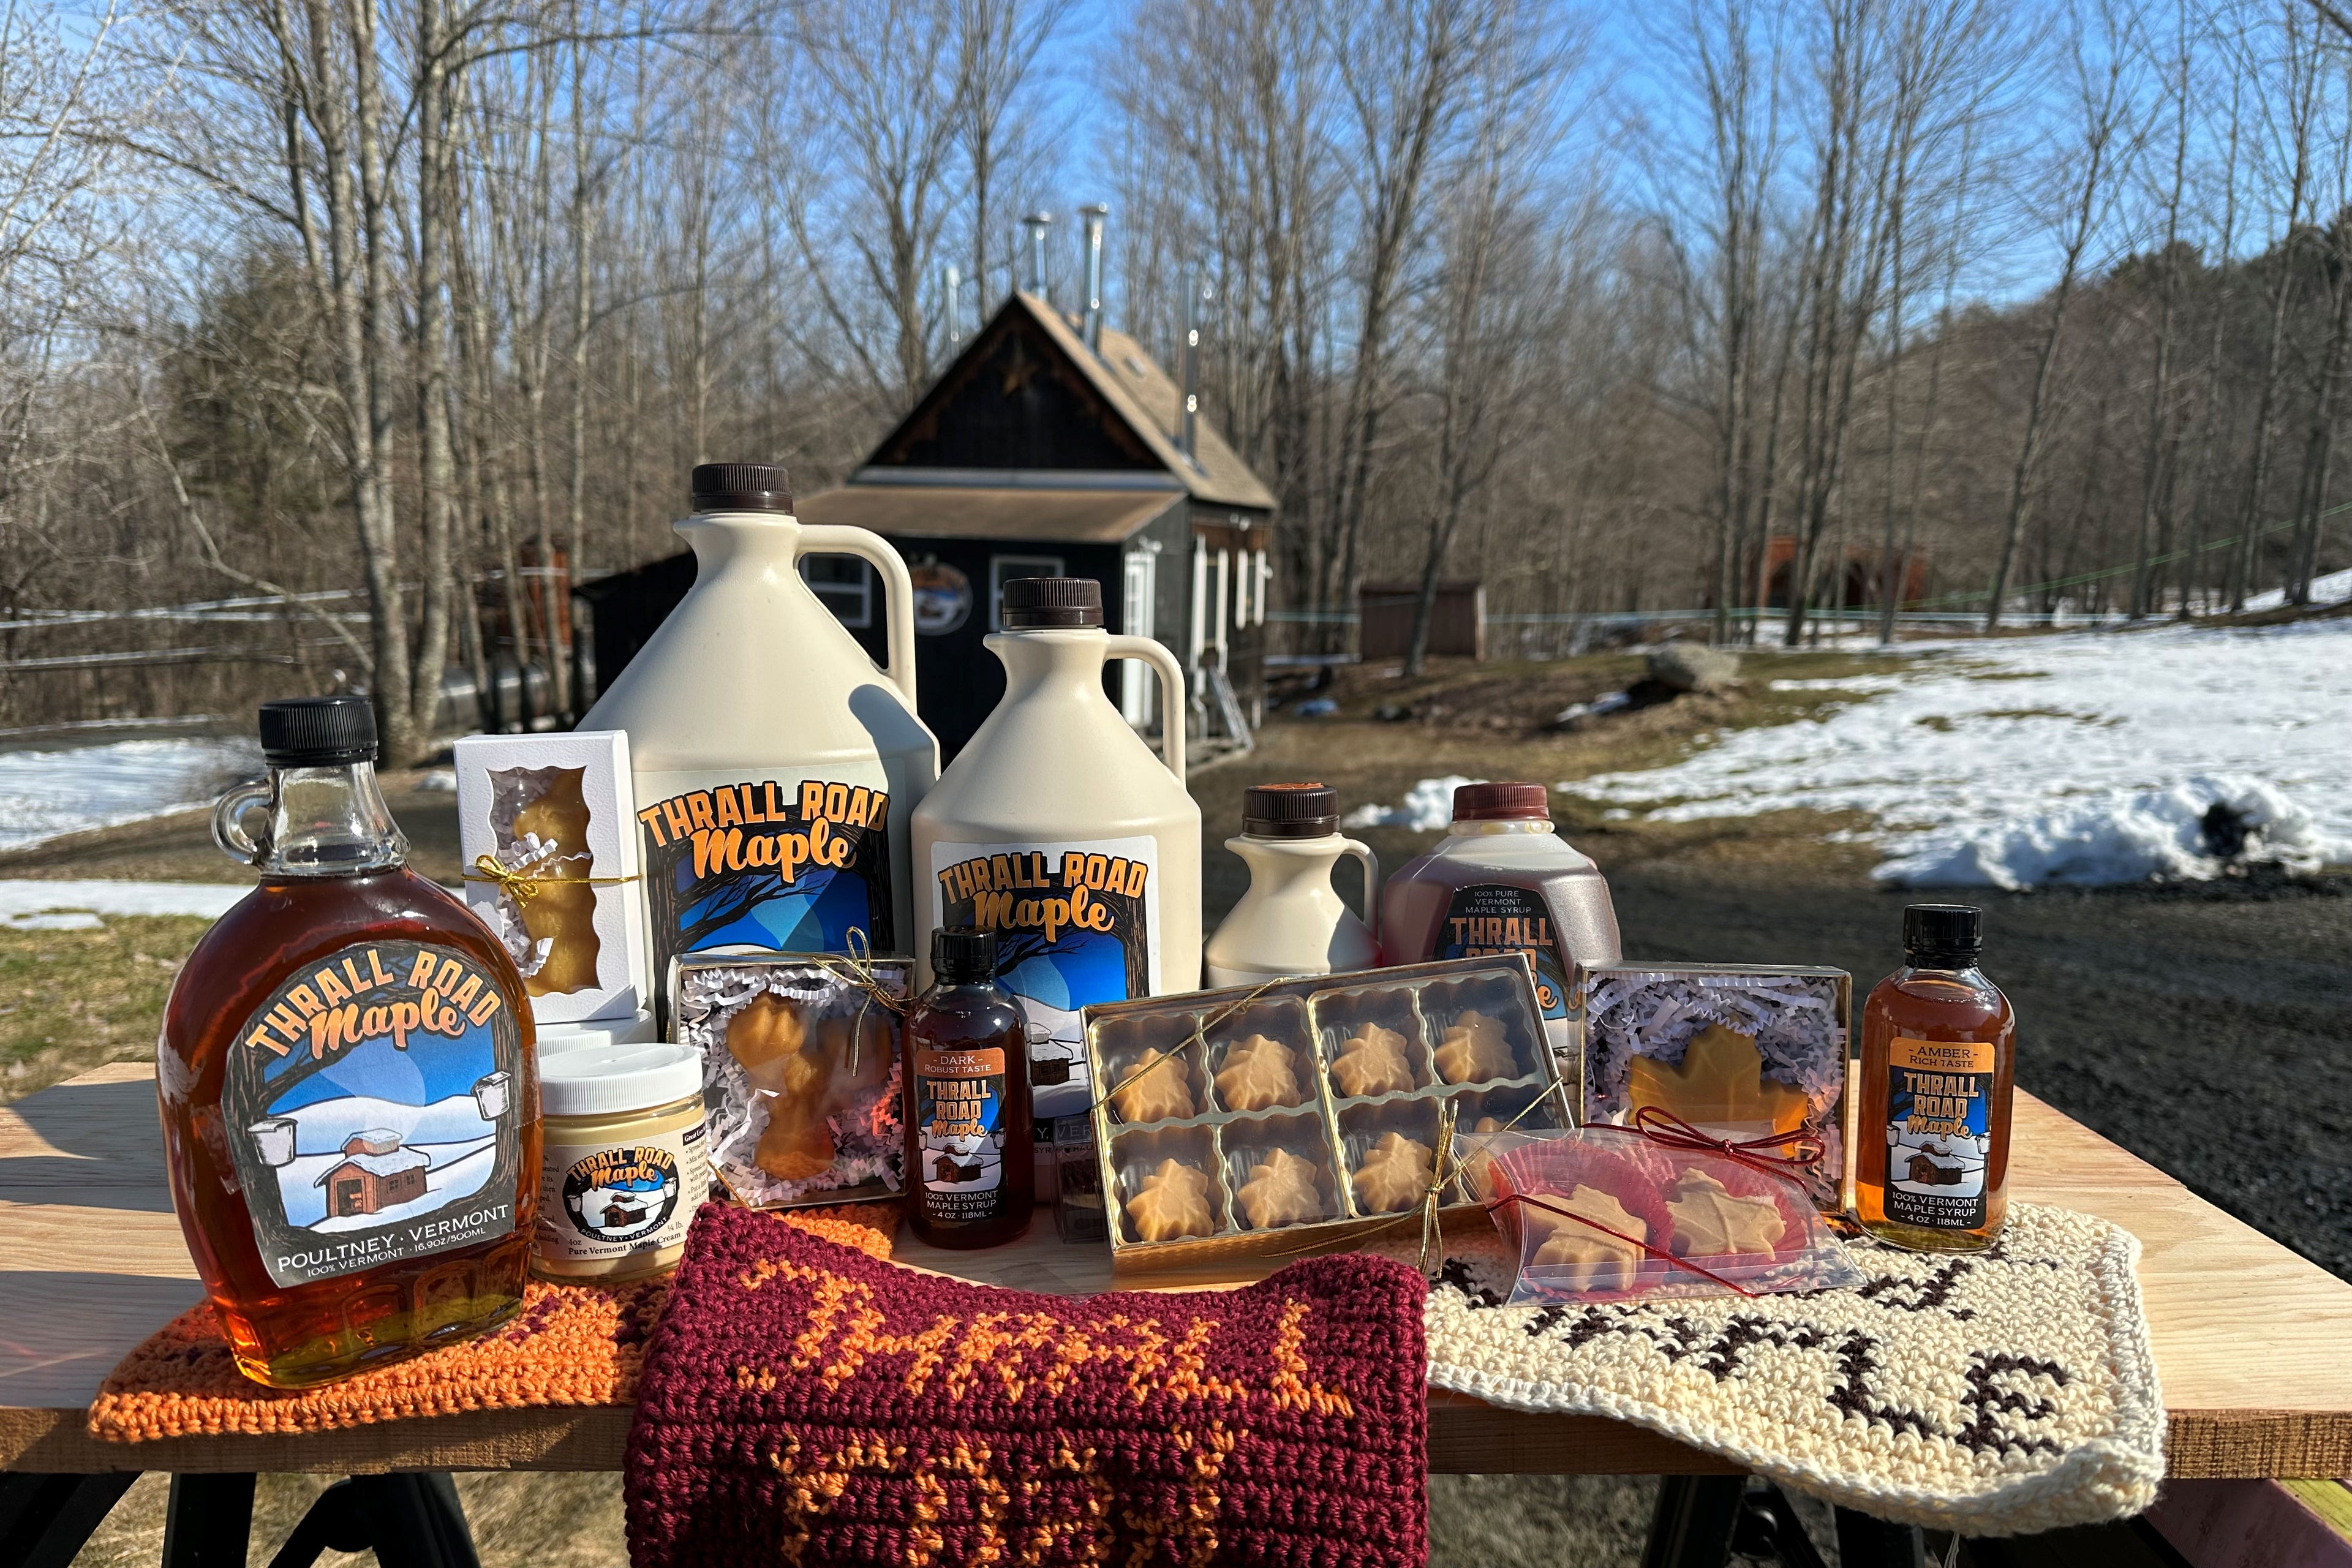 Thrall Road Maple Products